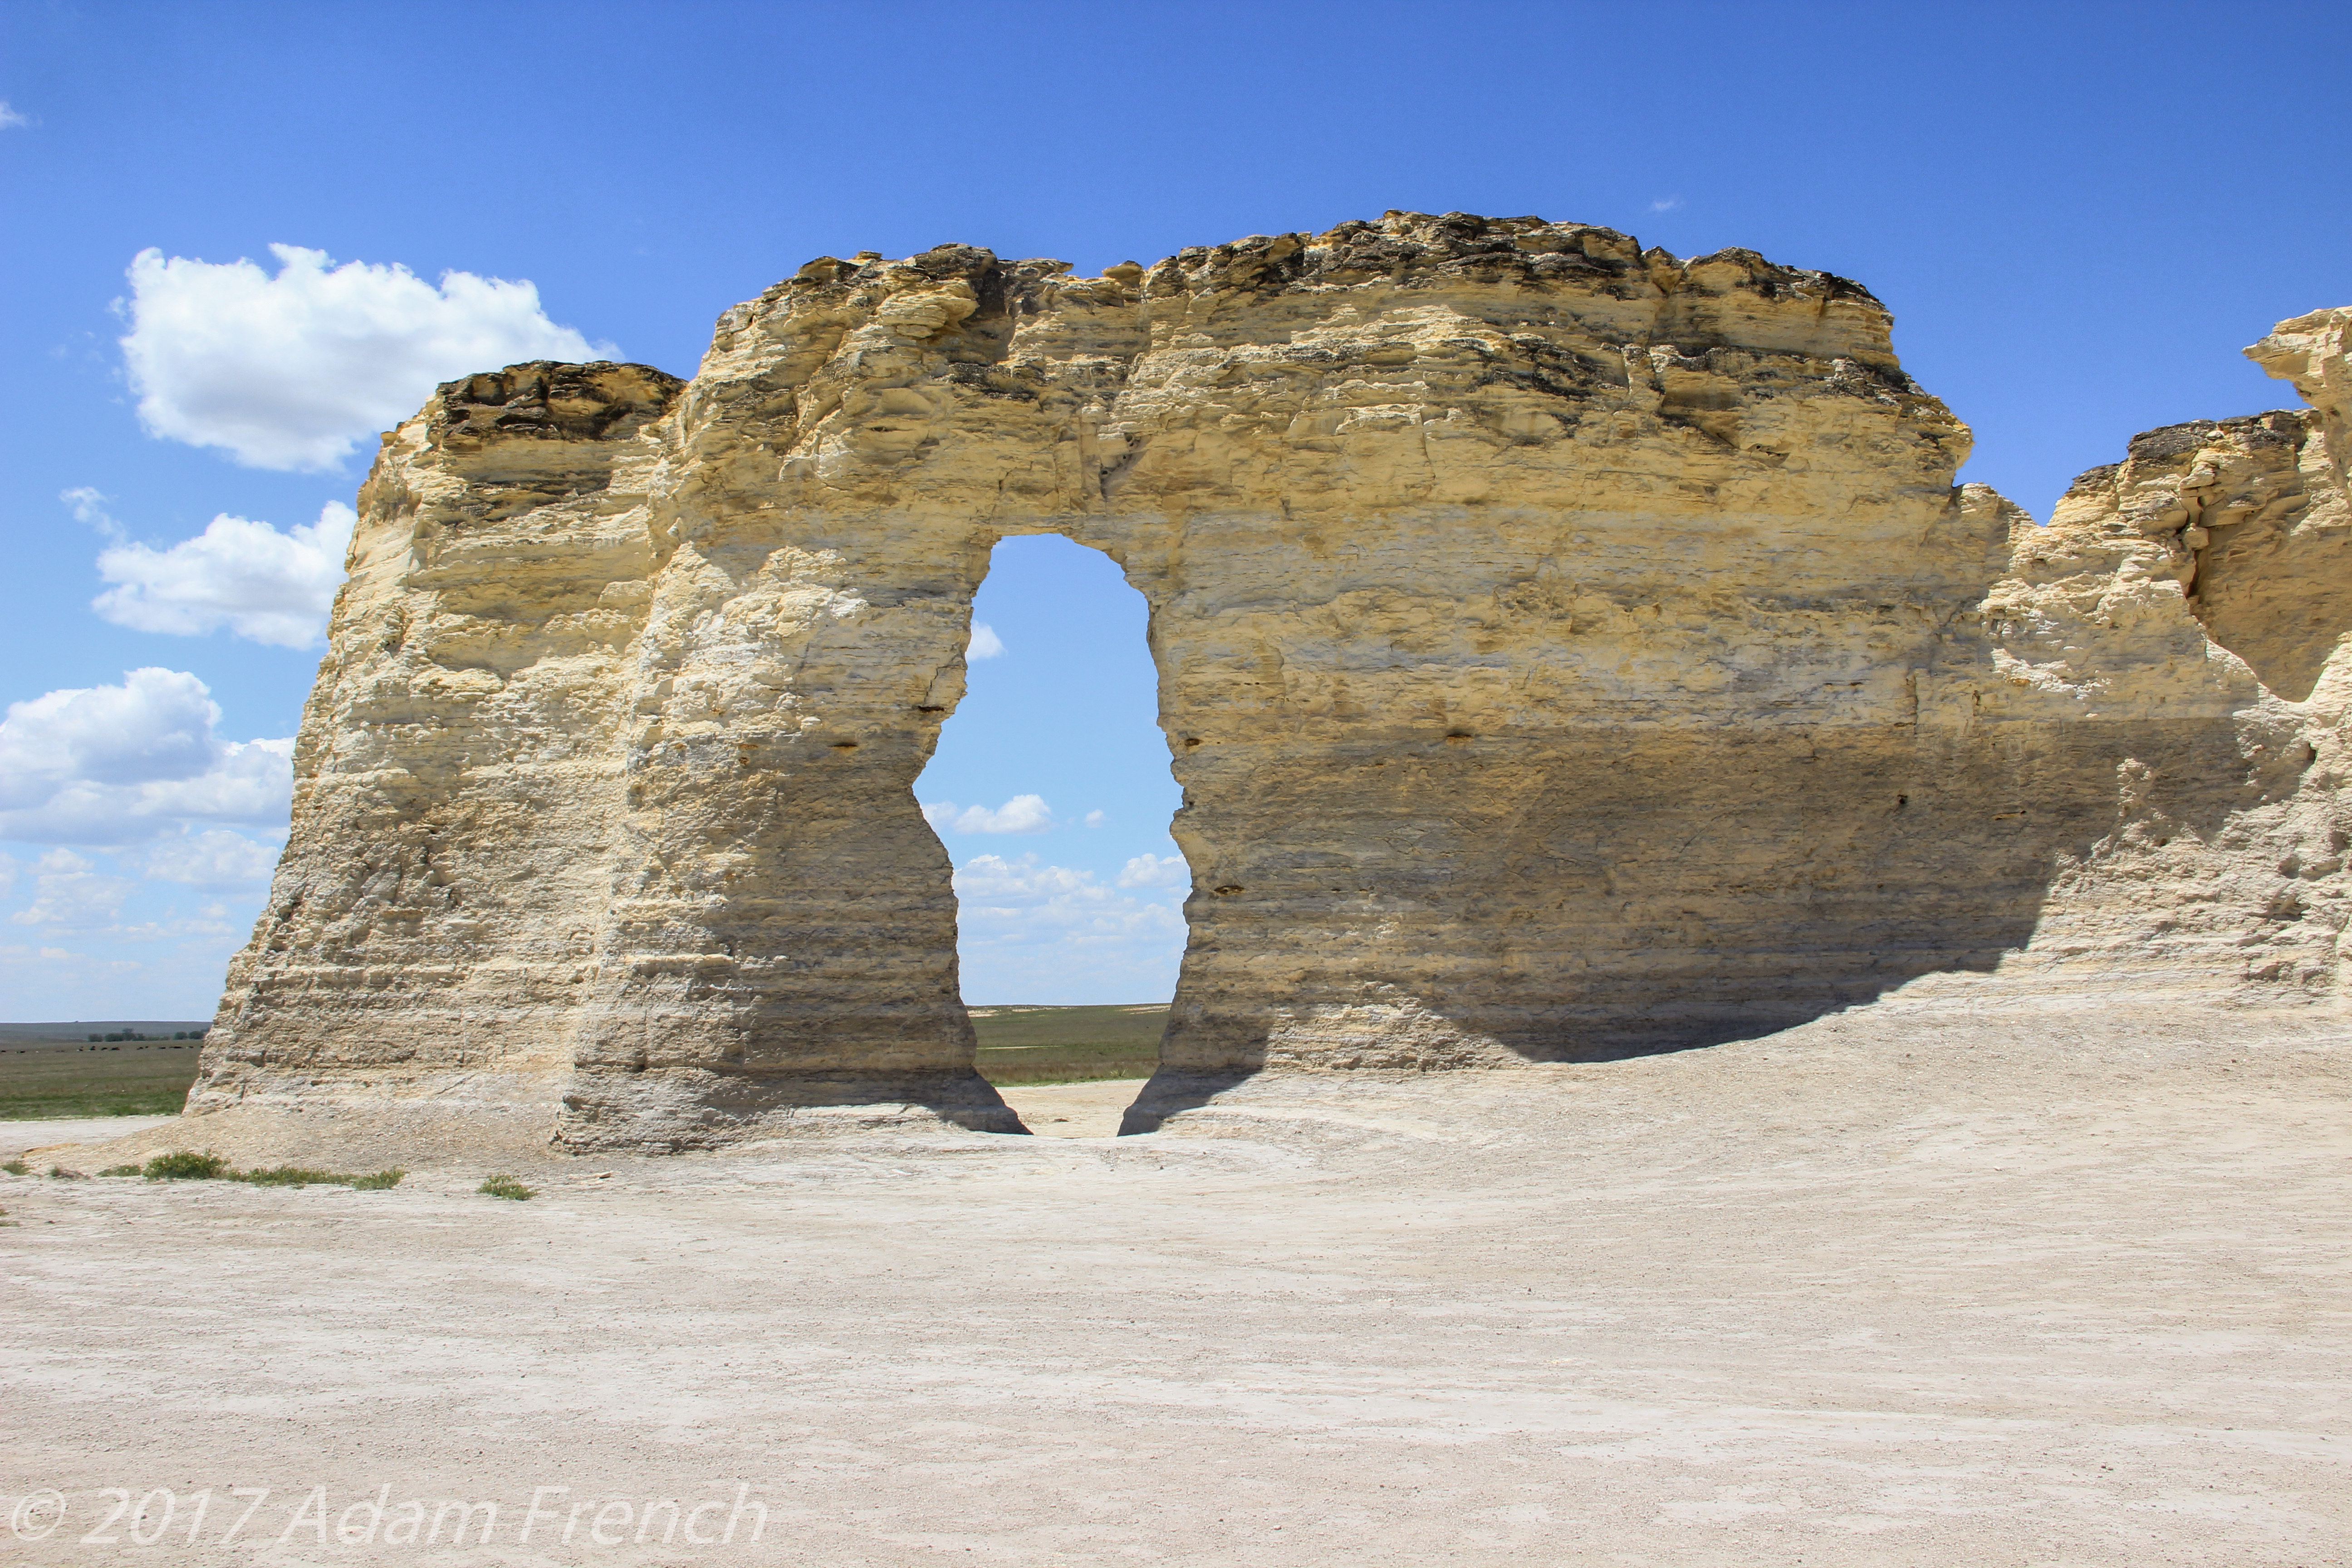 A large, white, rock rises from the ground with a large hole in the middle in a sandy, desert-like area